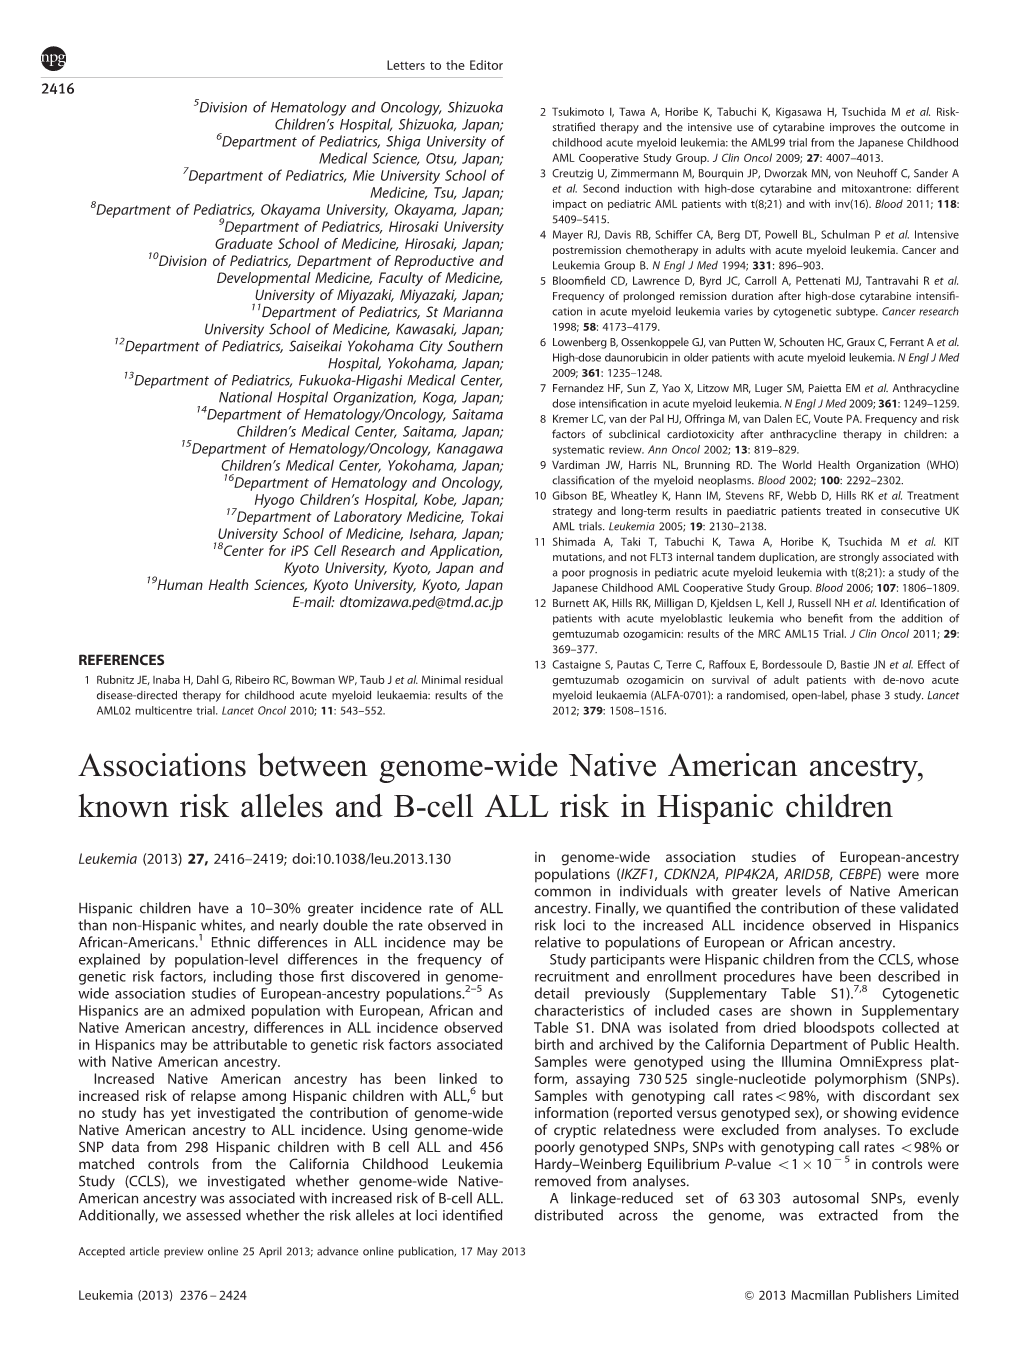 Associations Between Genome-Wide Native American Ancestry, Known Risk Alleles and B-Cell ALL Risk in Hispanic Children